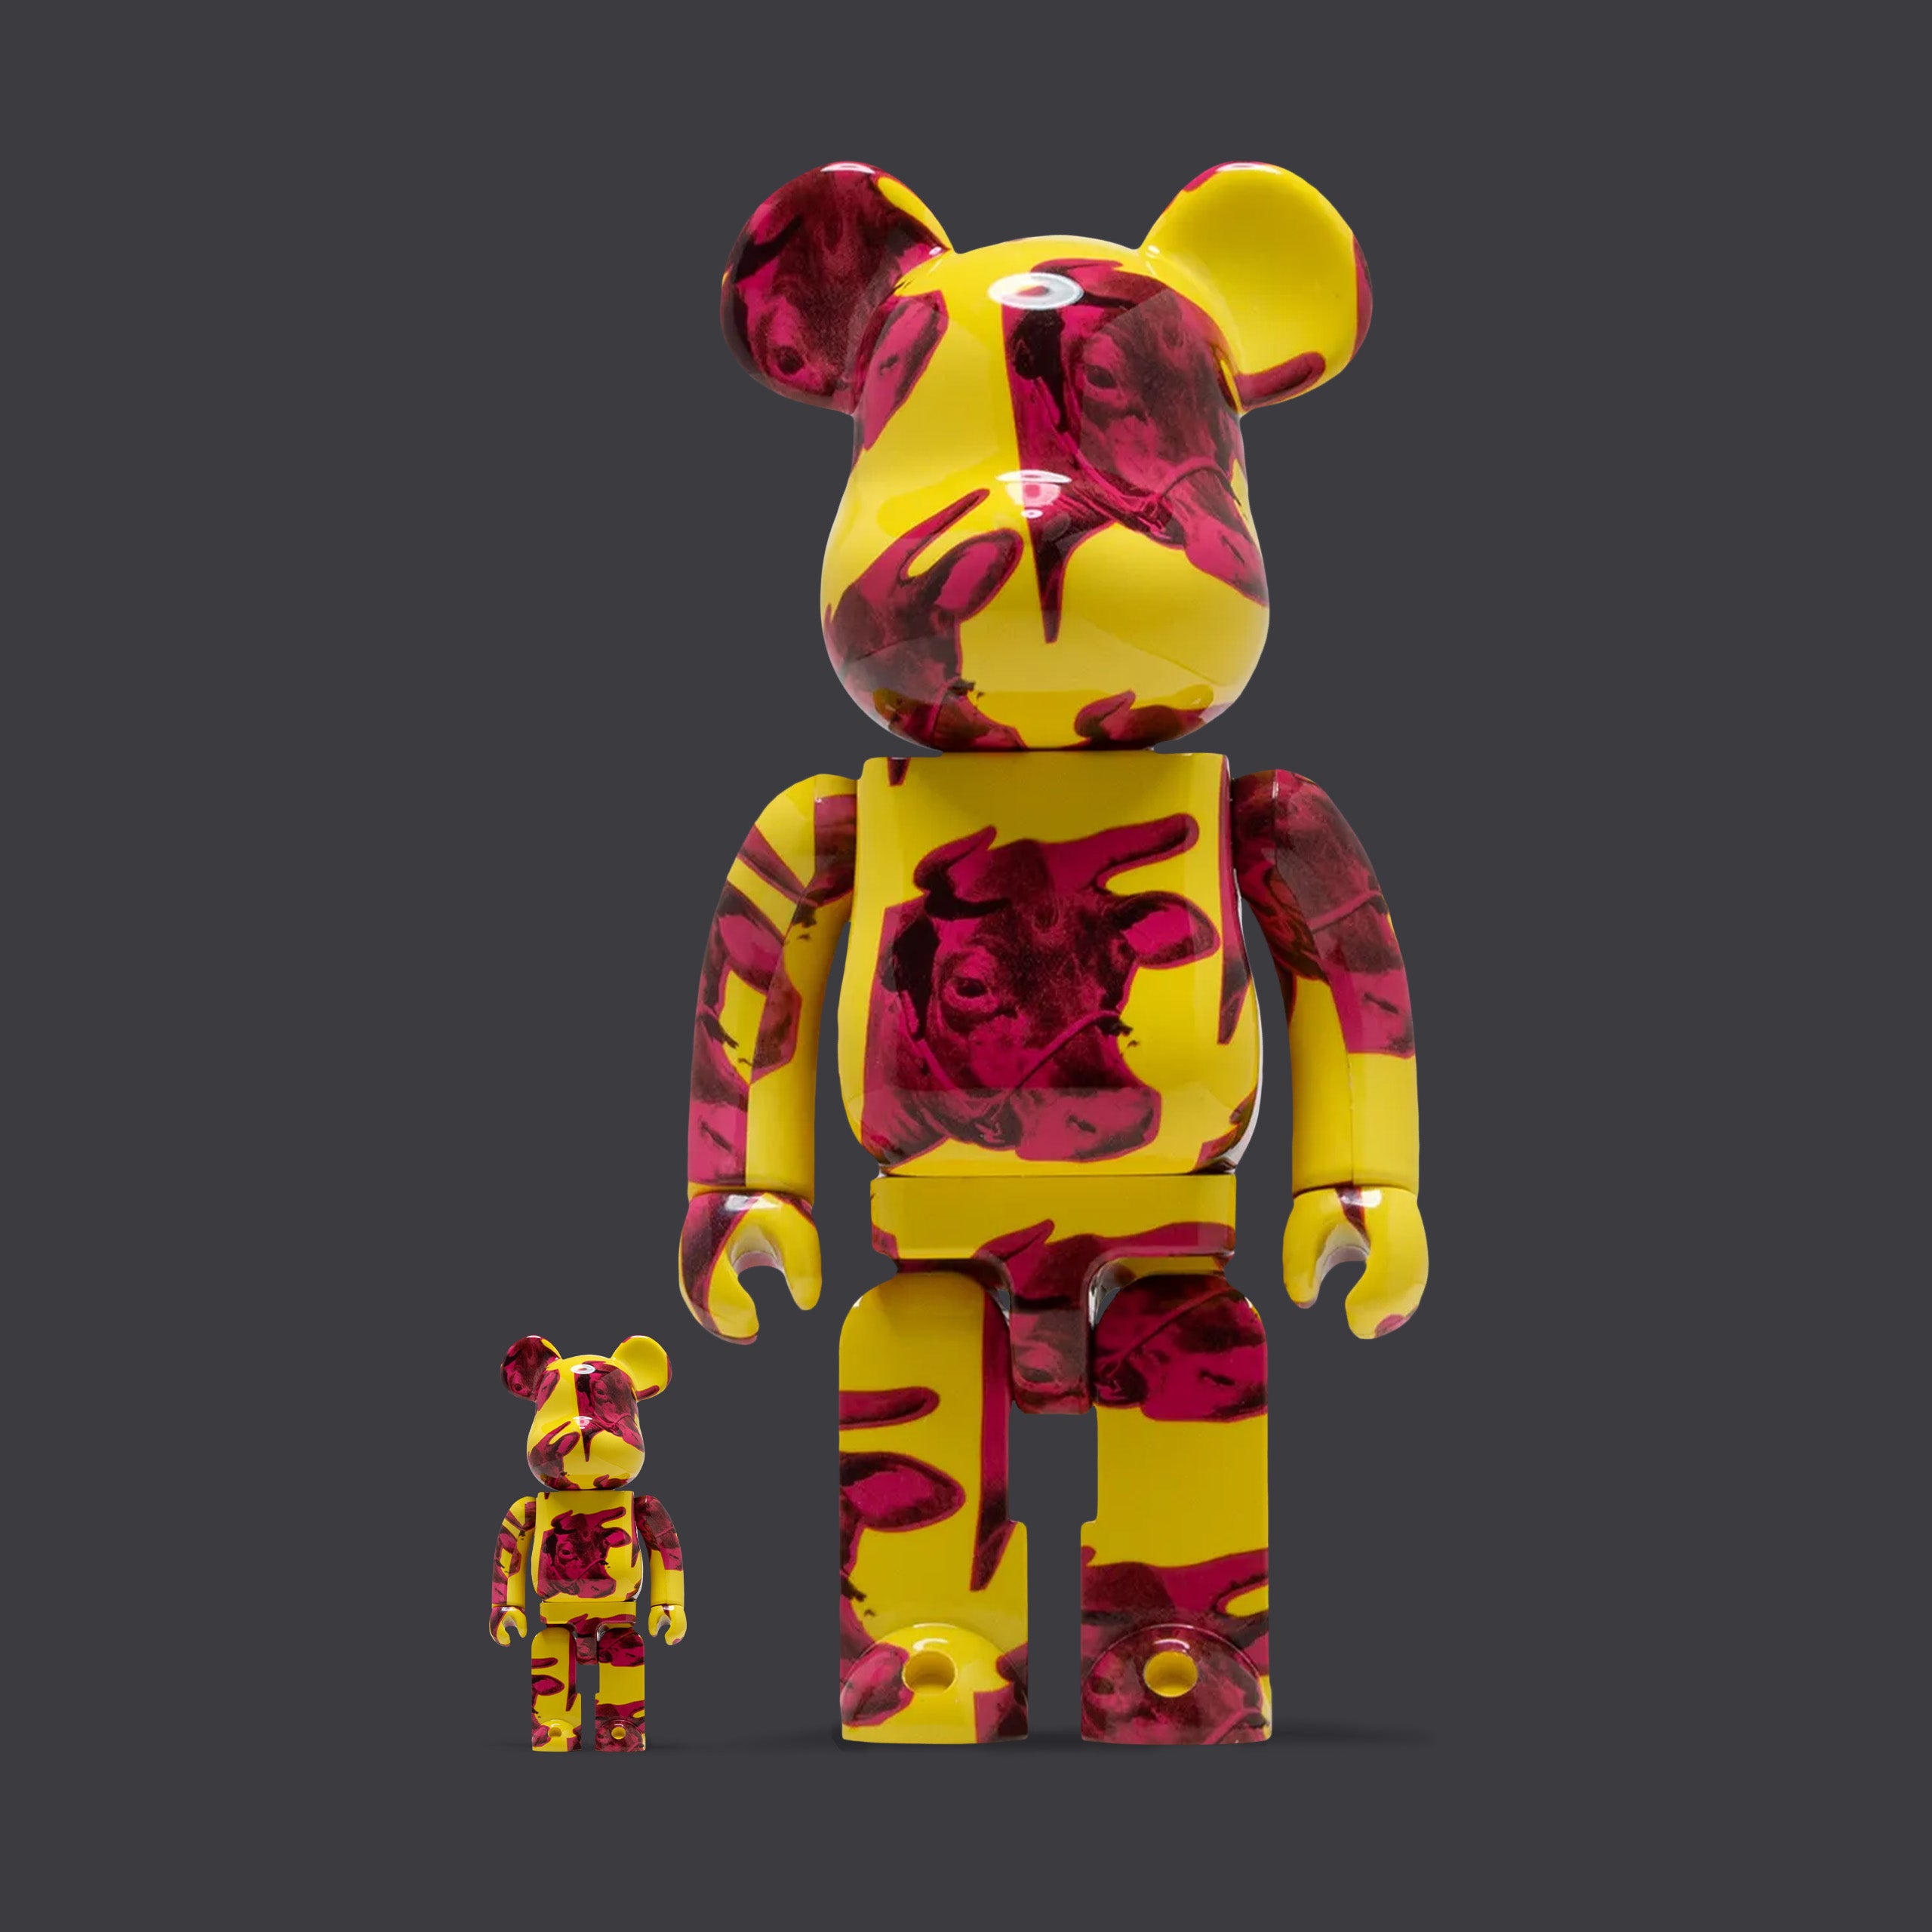 MEDICOM BEARBRICK 400% ANDY WARHOL COW WALLPAPER 2-PACK Red/Yellow